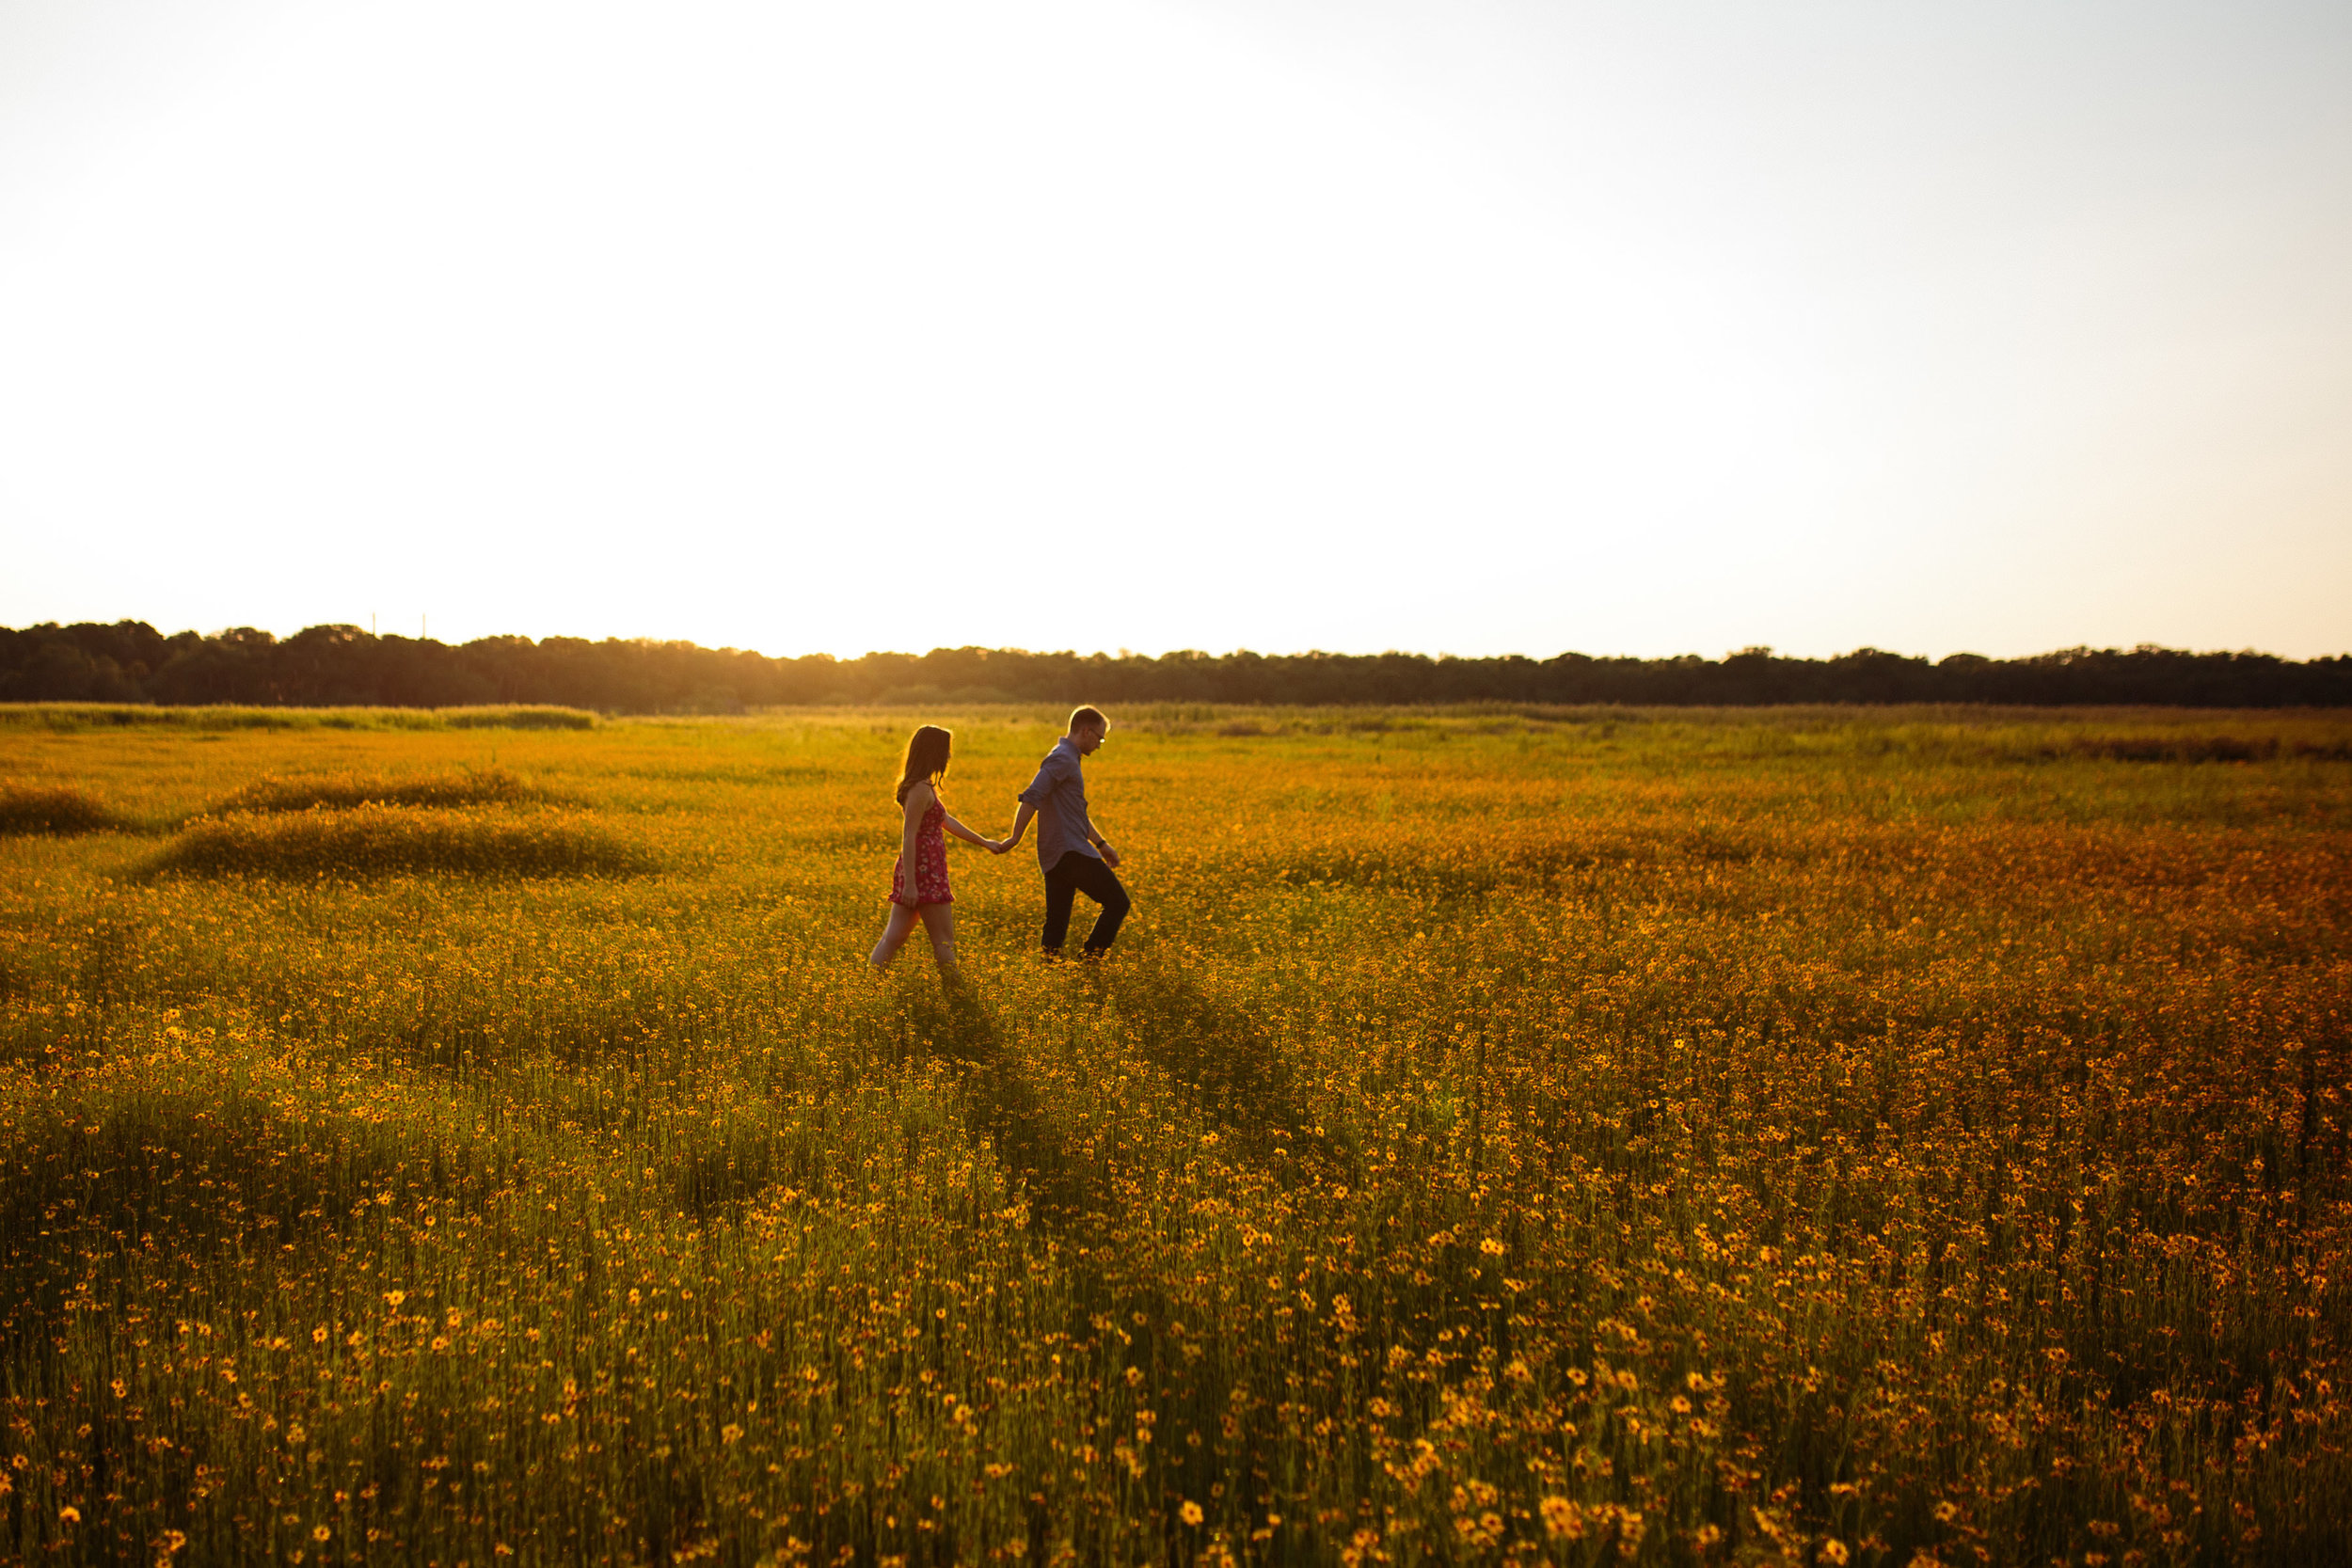 Field of Wild Flowers Engagement Session | Benjamin Hewitt Photography